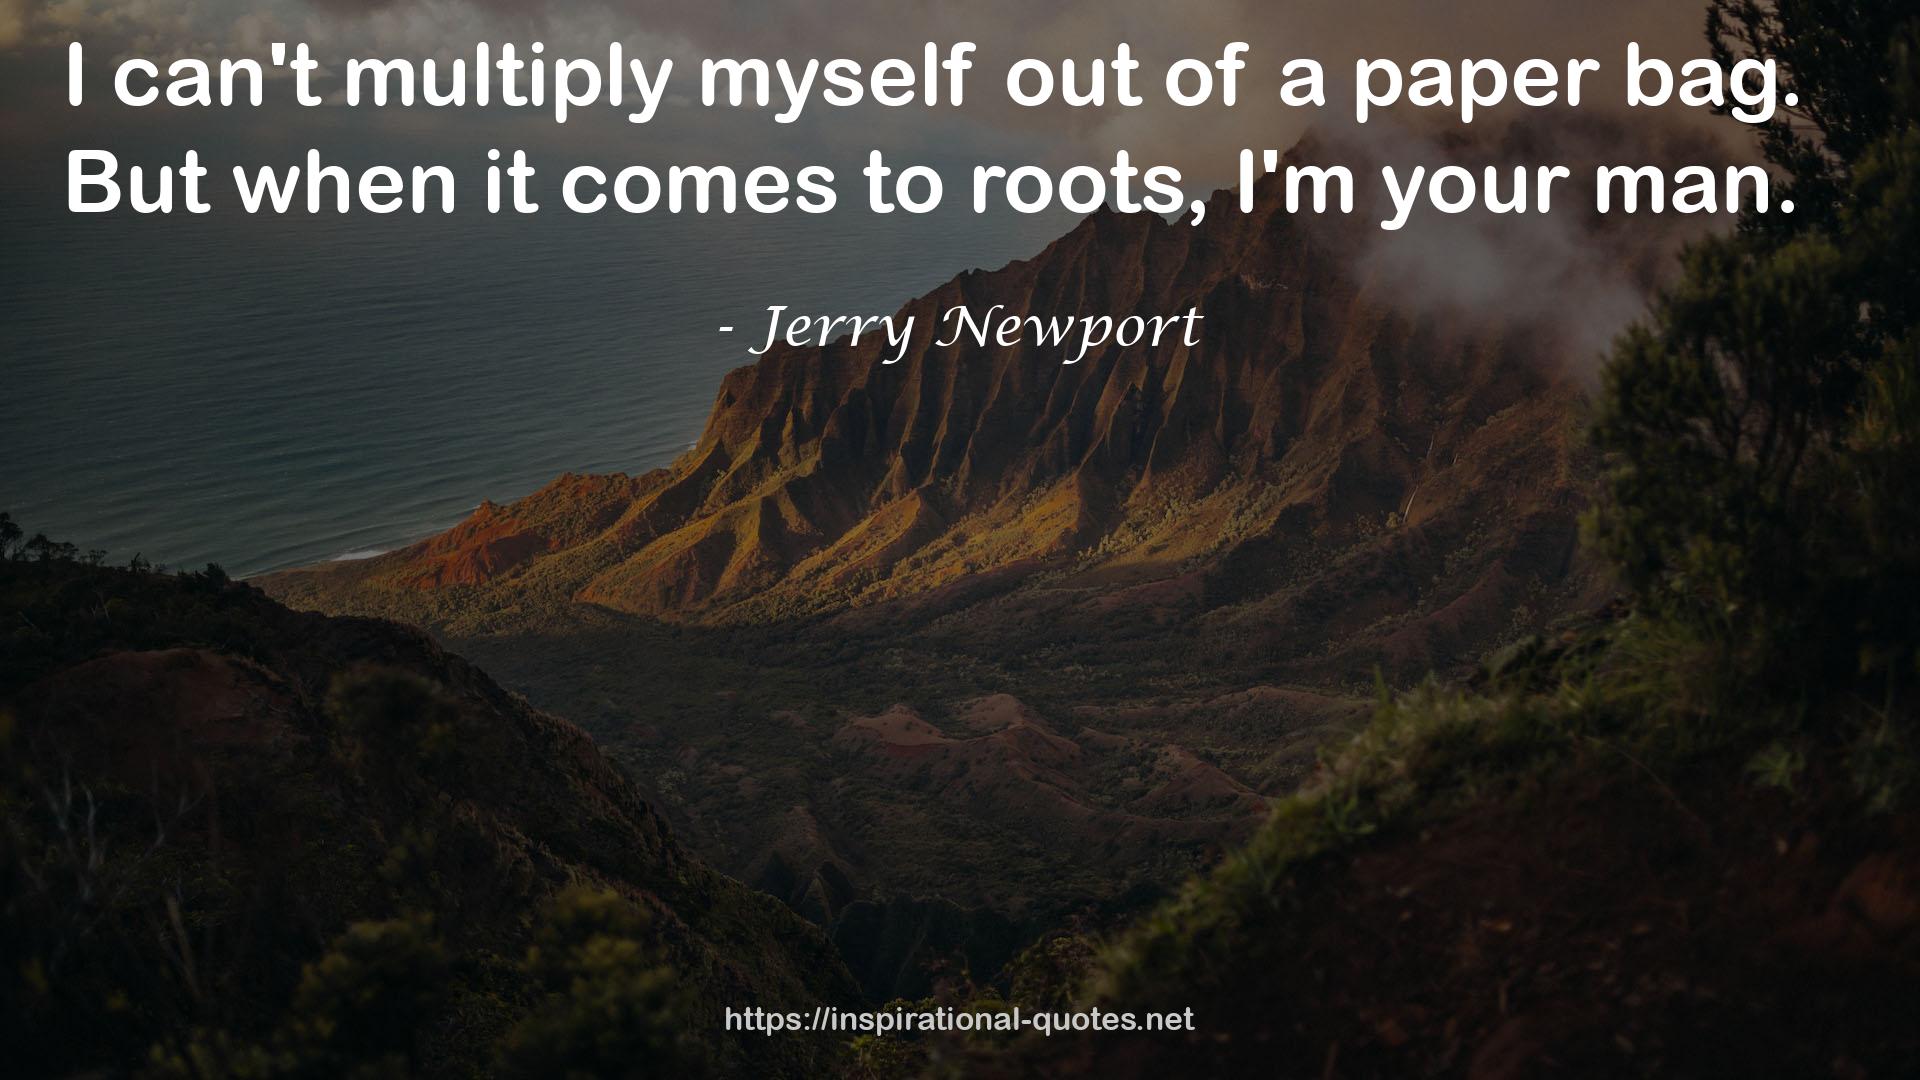 Jerry Newport QUOTES